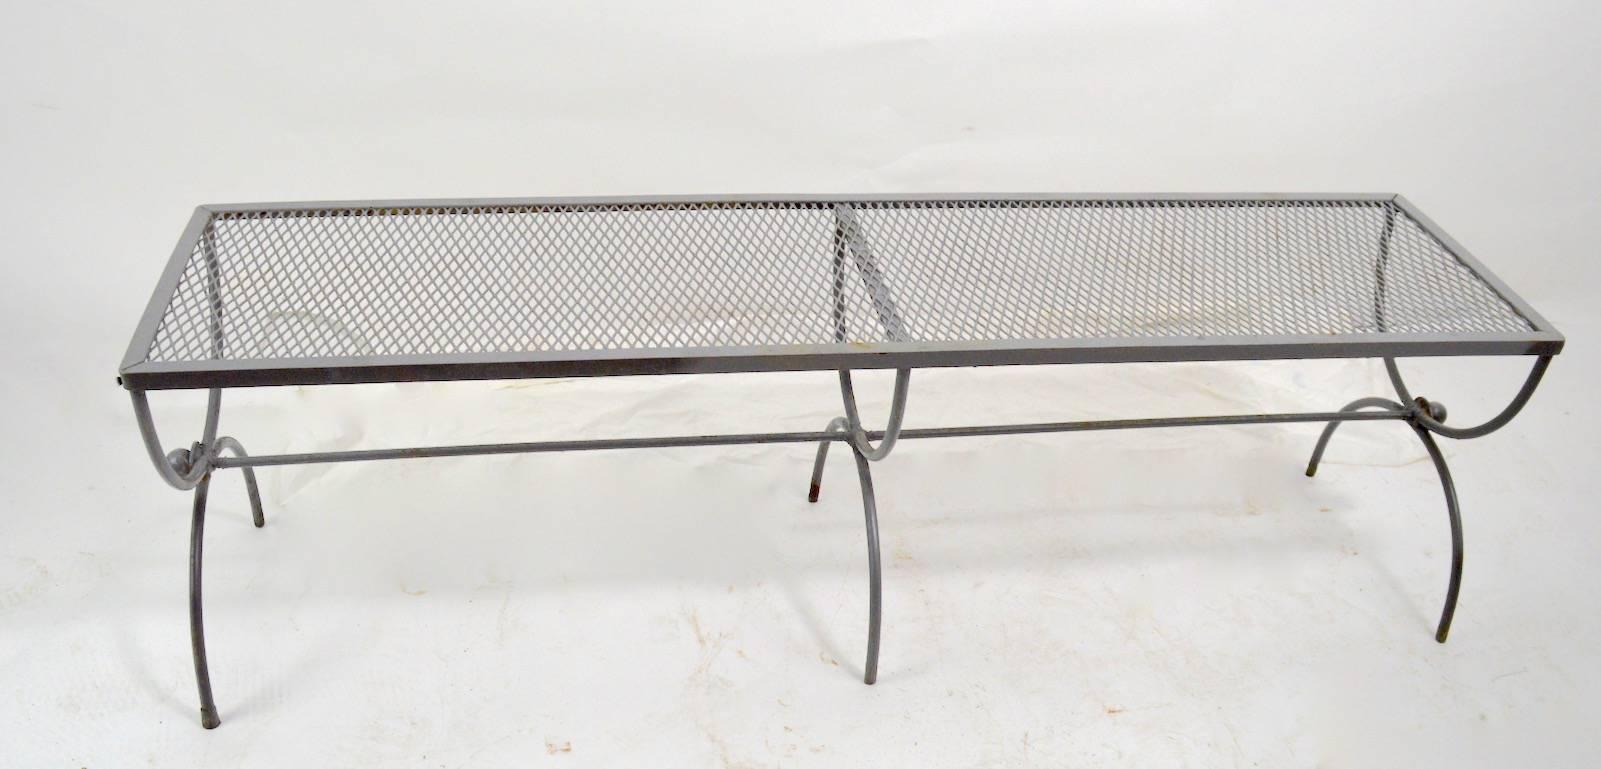 Modernist, neoclassical style bench attributed to Woodard. Nice example suitable for indoor and or outdoor use, currently in later grey paint finish, which shows wear. Usable as is, or we offer custom powder coating if you want a more finished look.